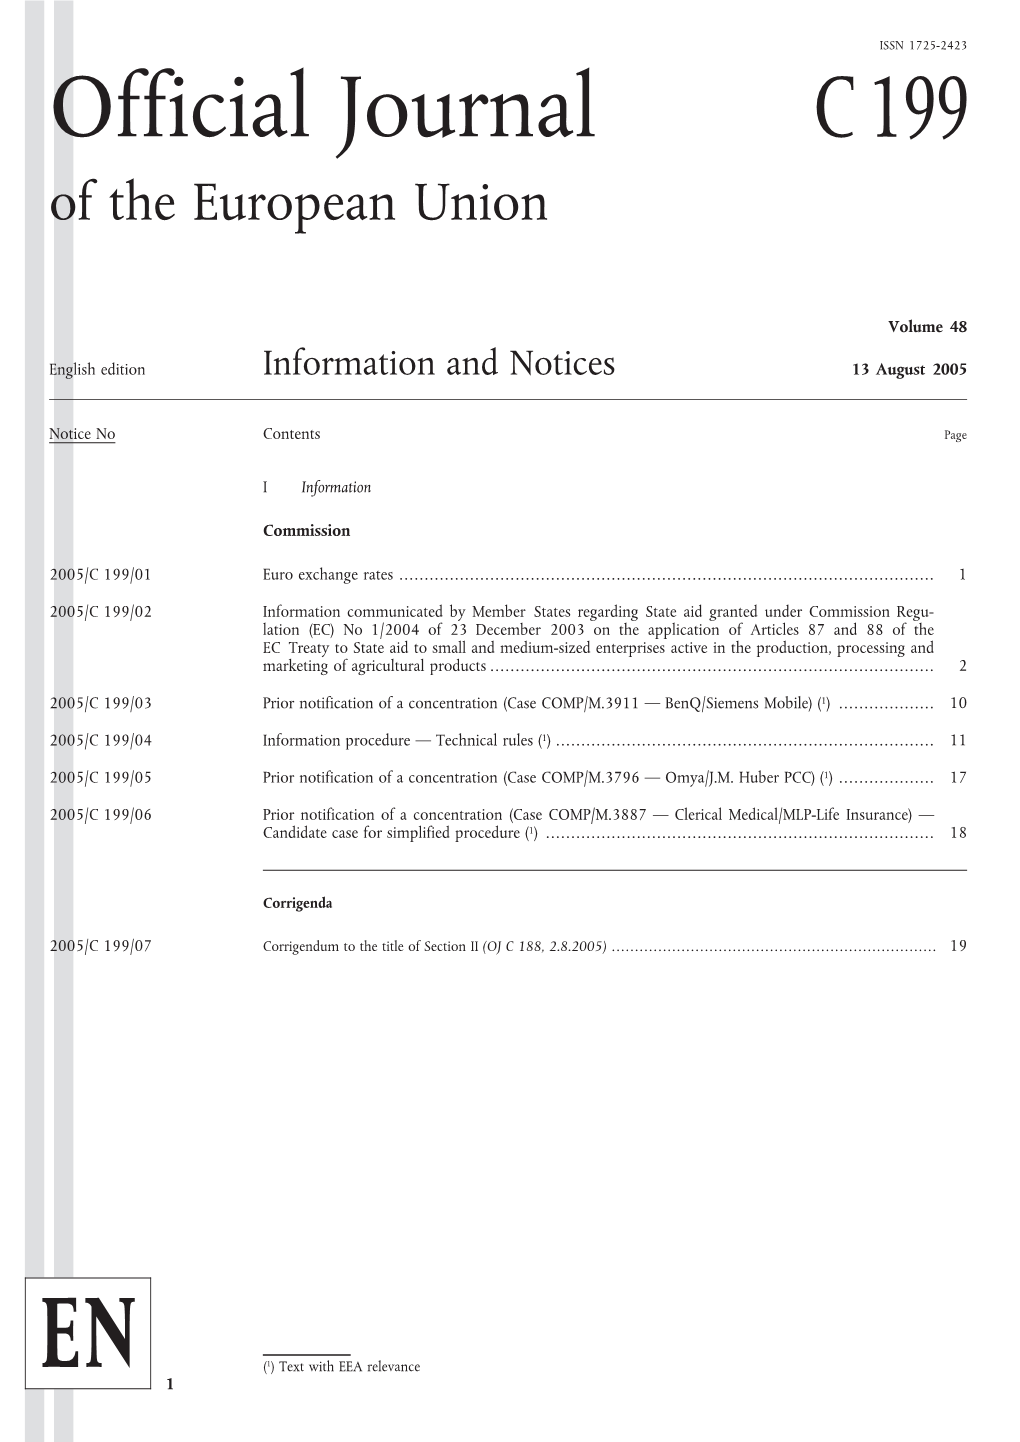 Official Journal C199 of the European Union